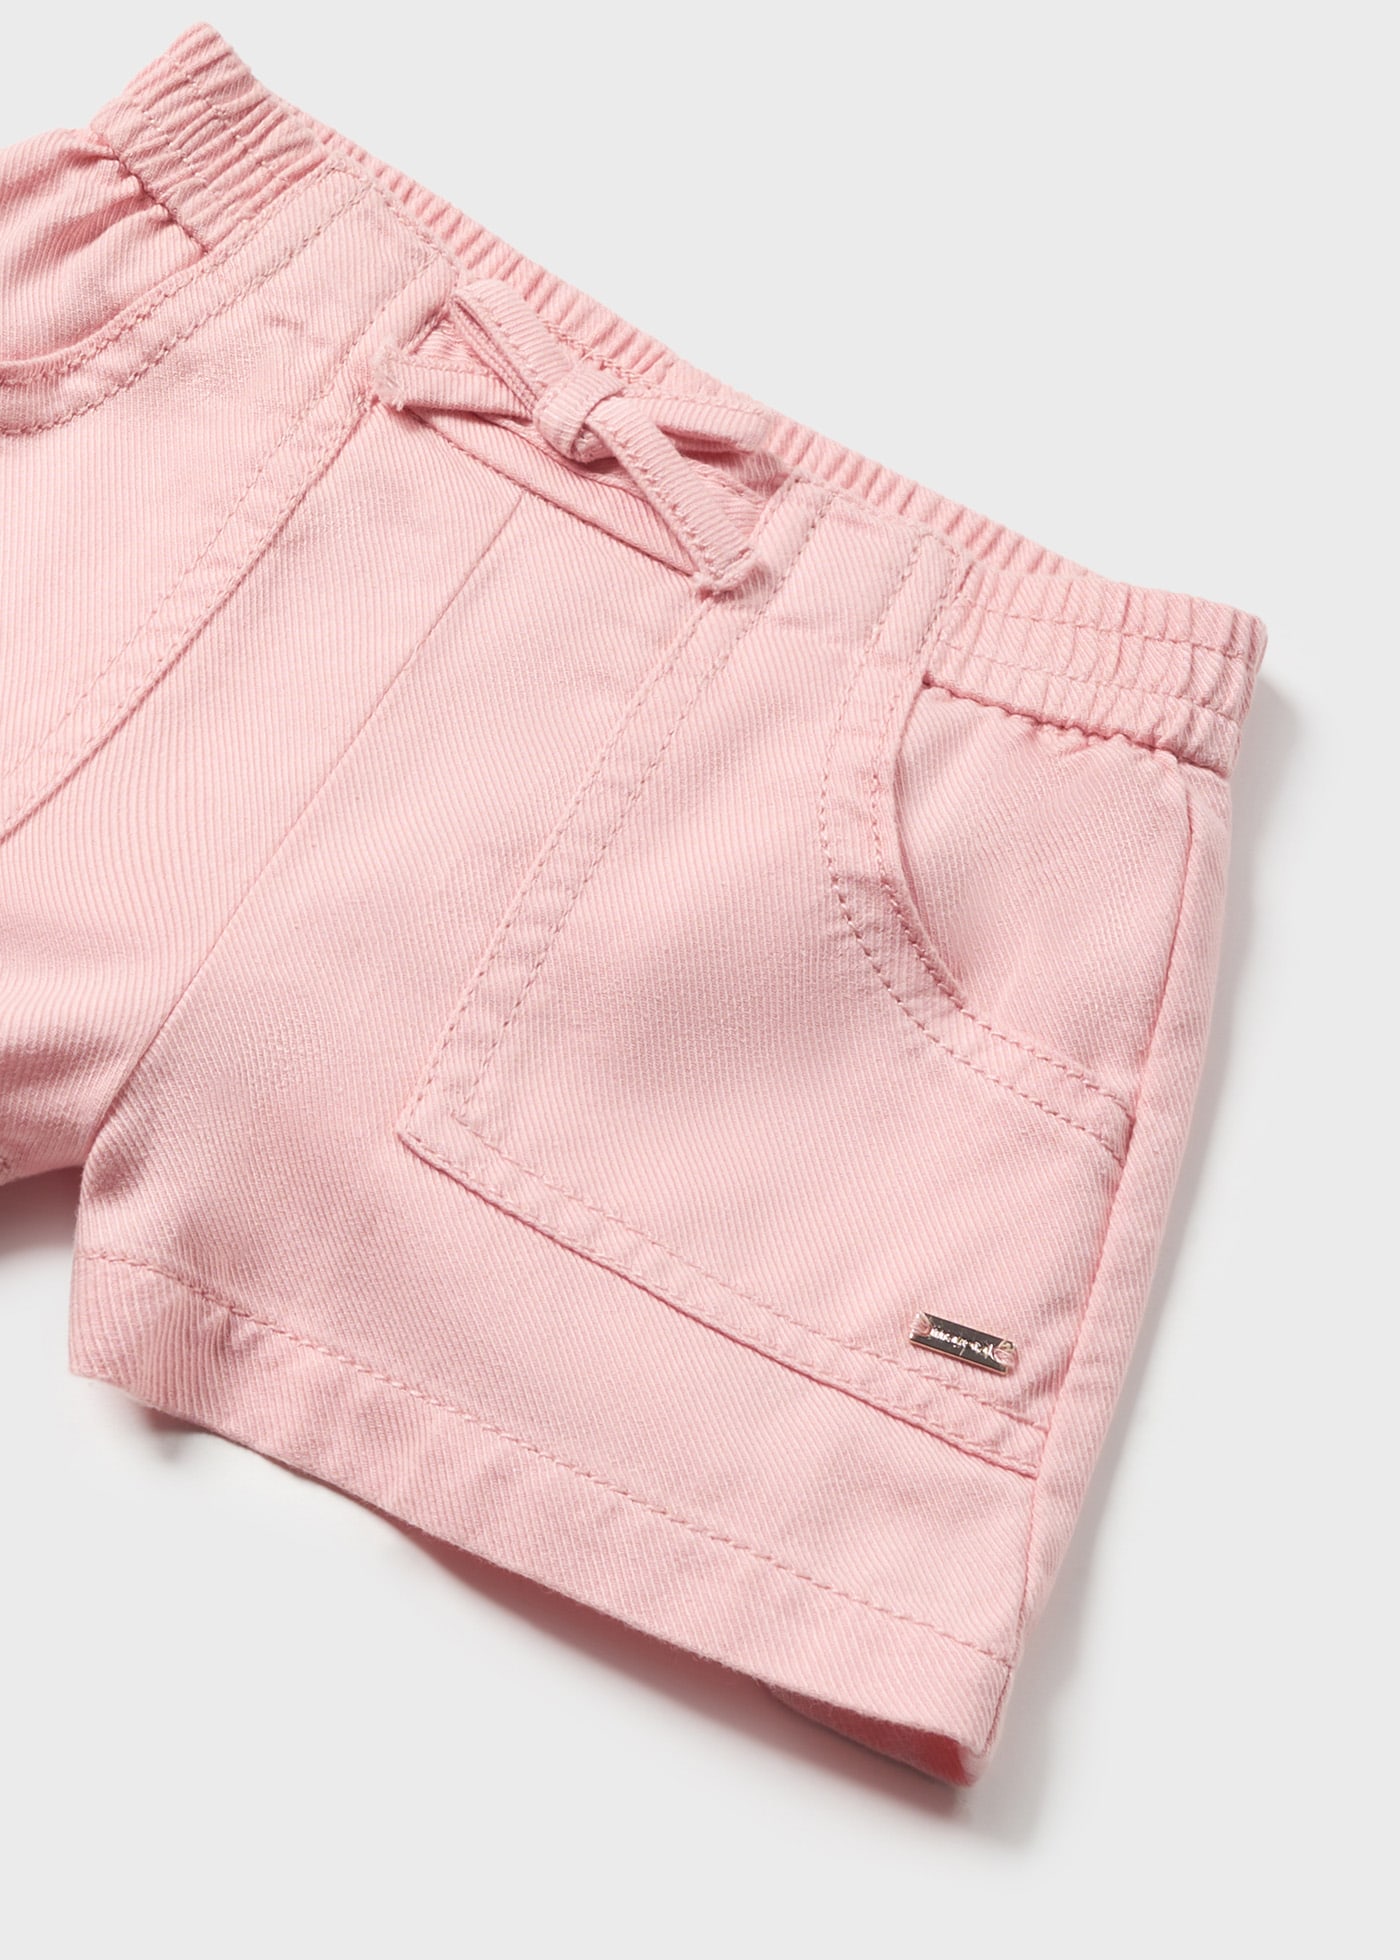 Baby Shorts with Pockets